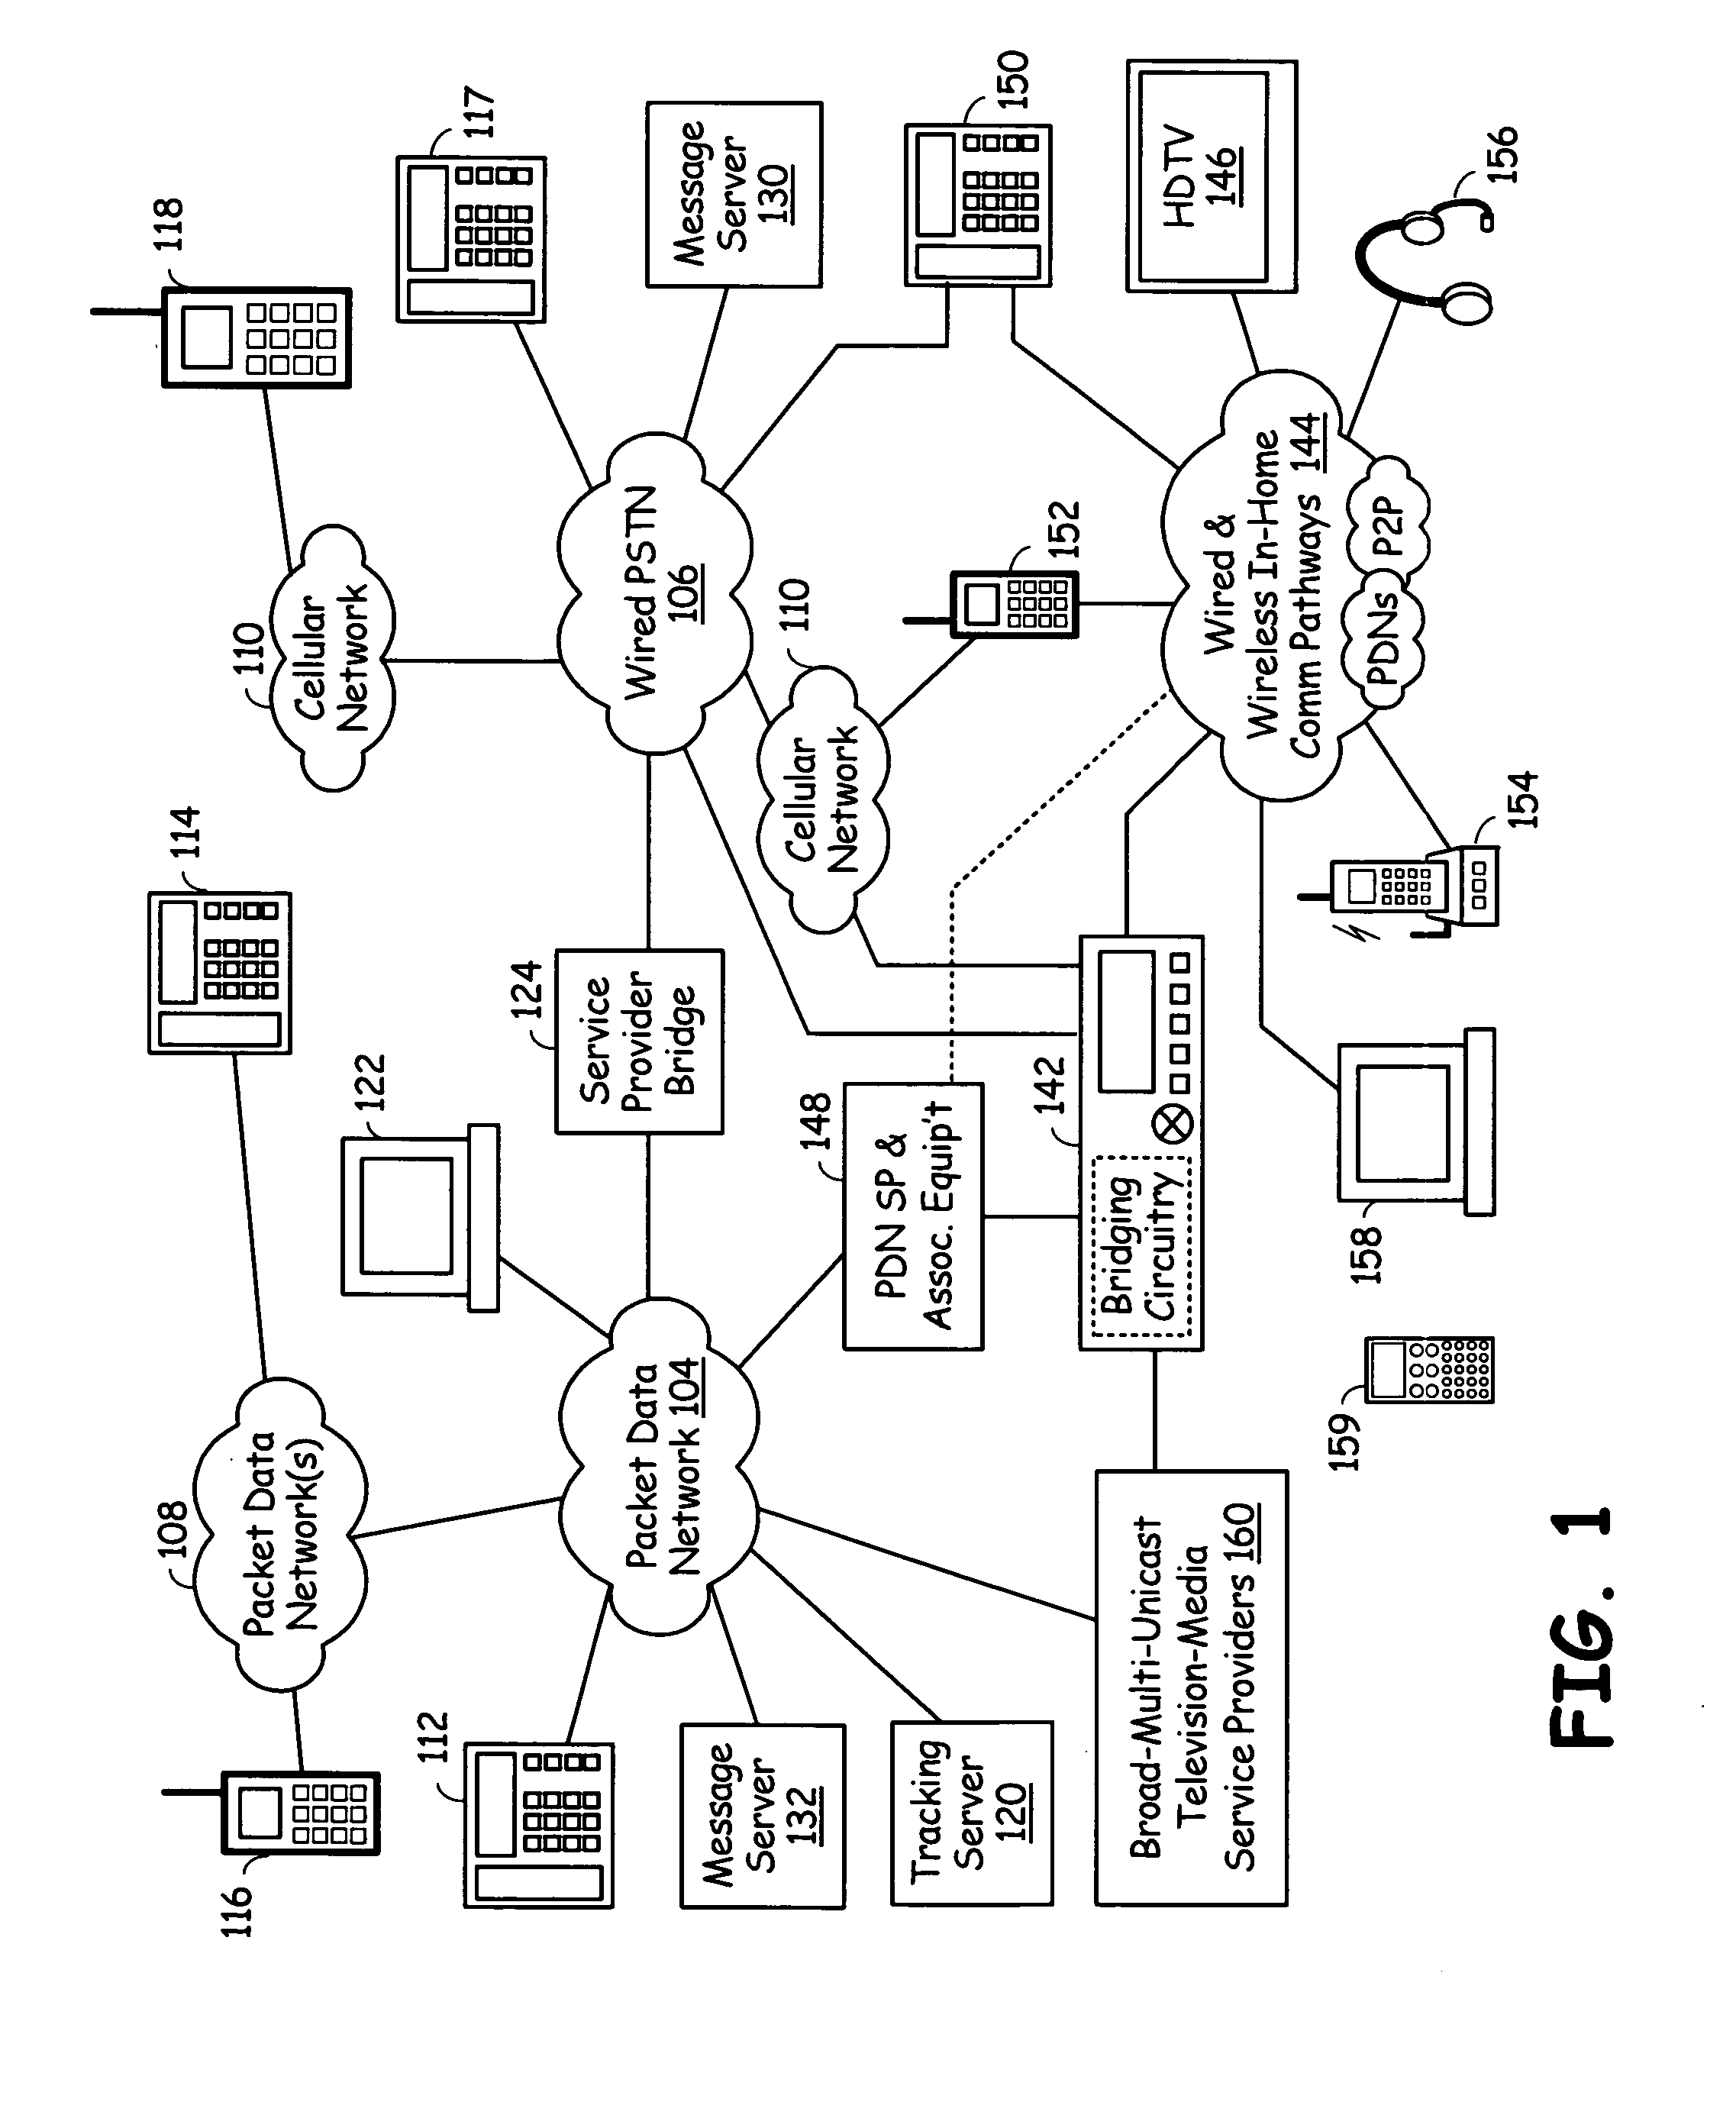 Set top box supporting selective local call termination and call bridging